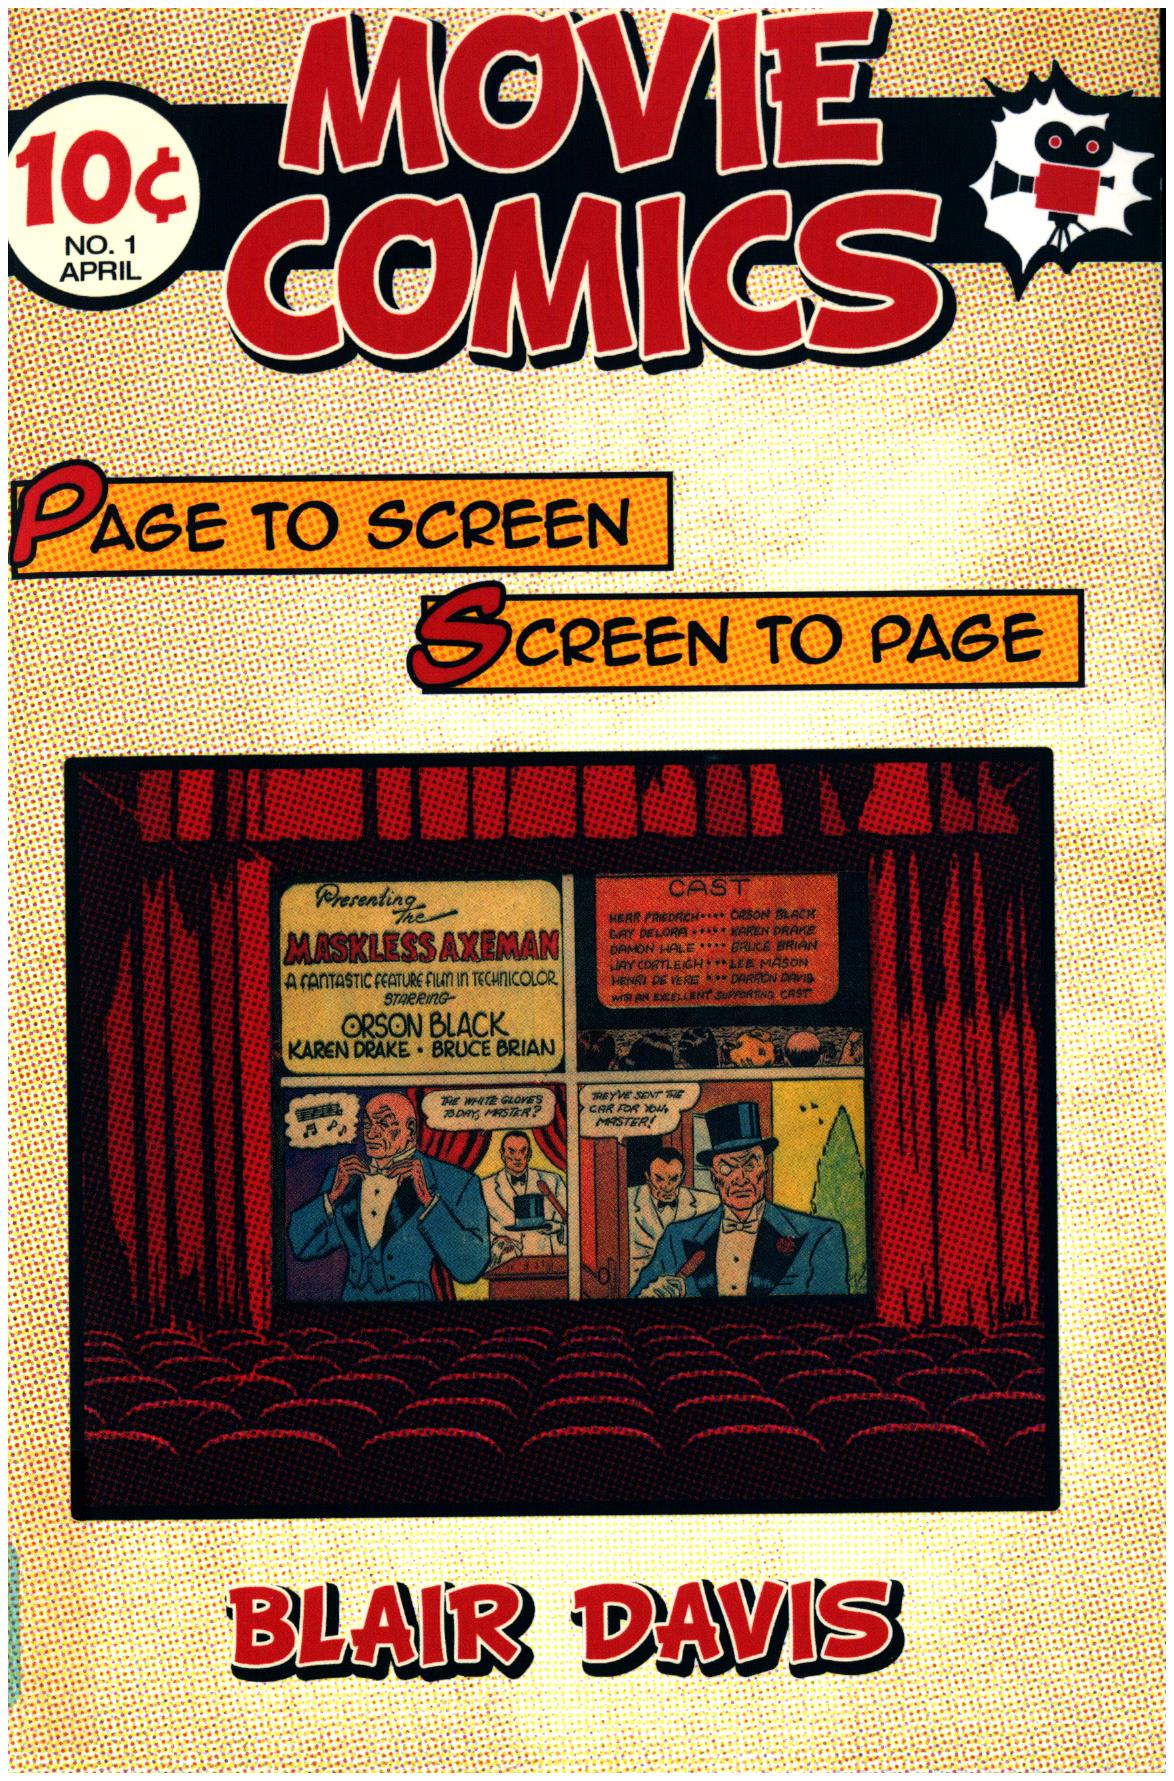 Movie Comics: Page to Screen / Screen to Page book jacket